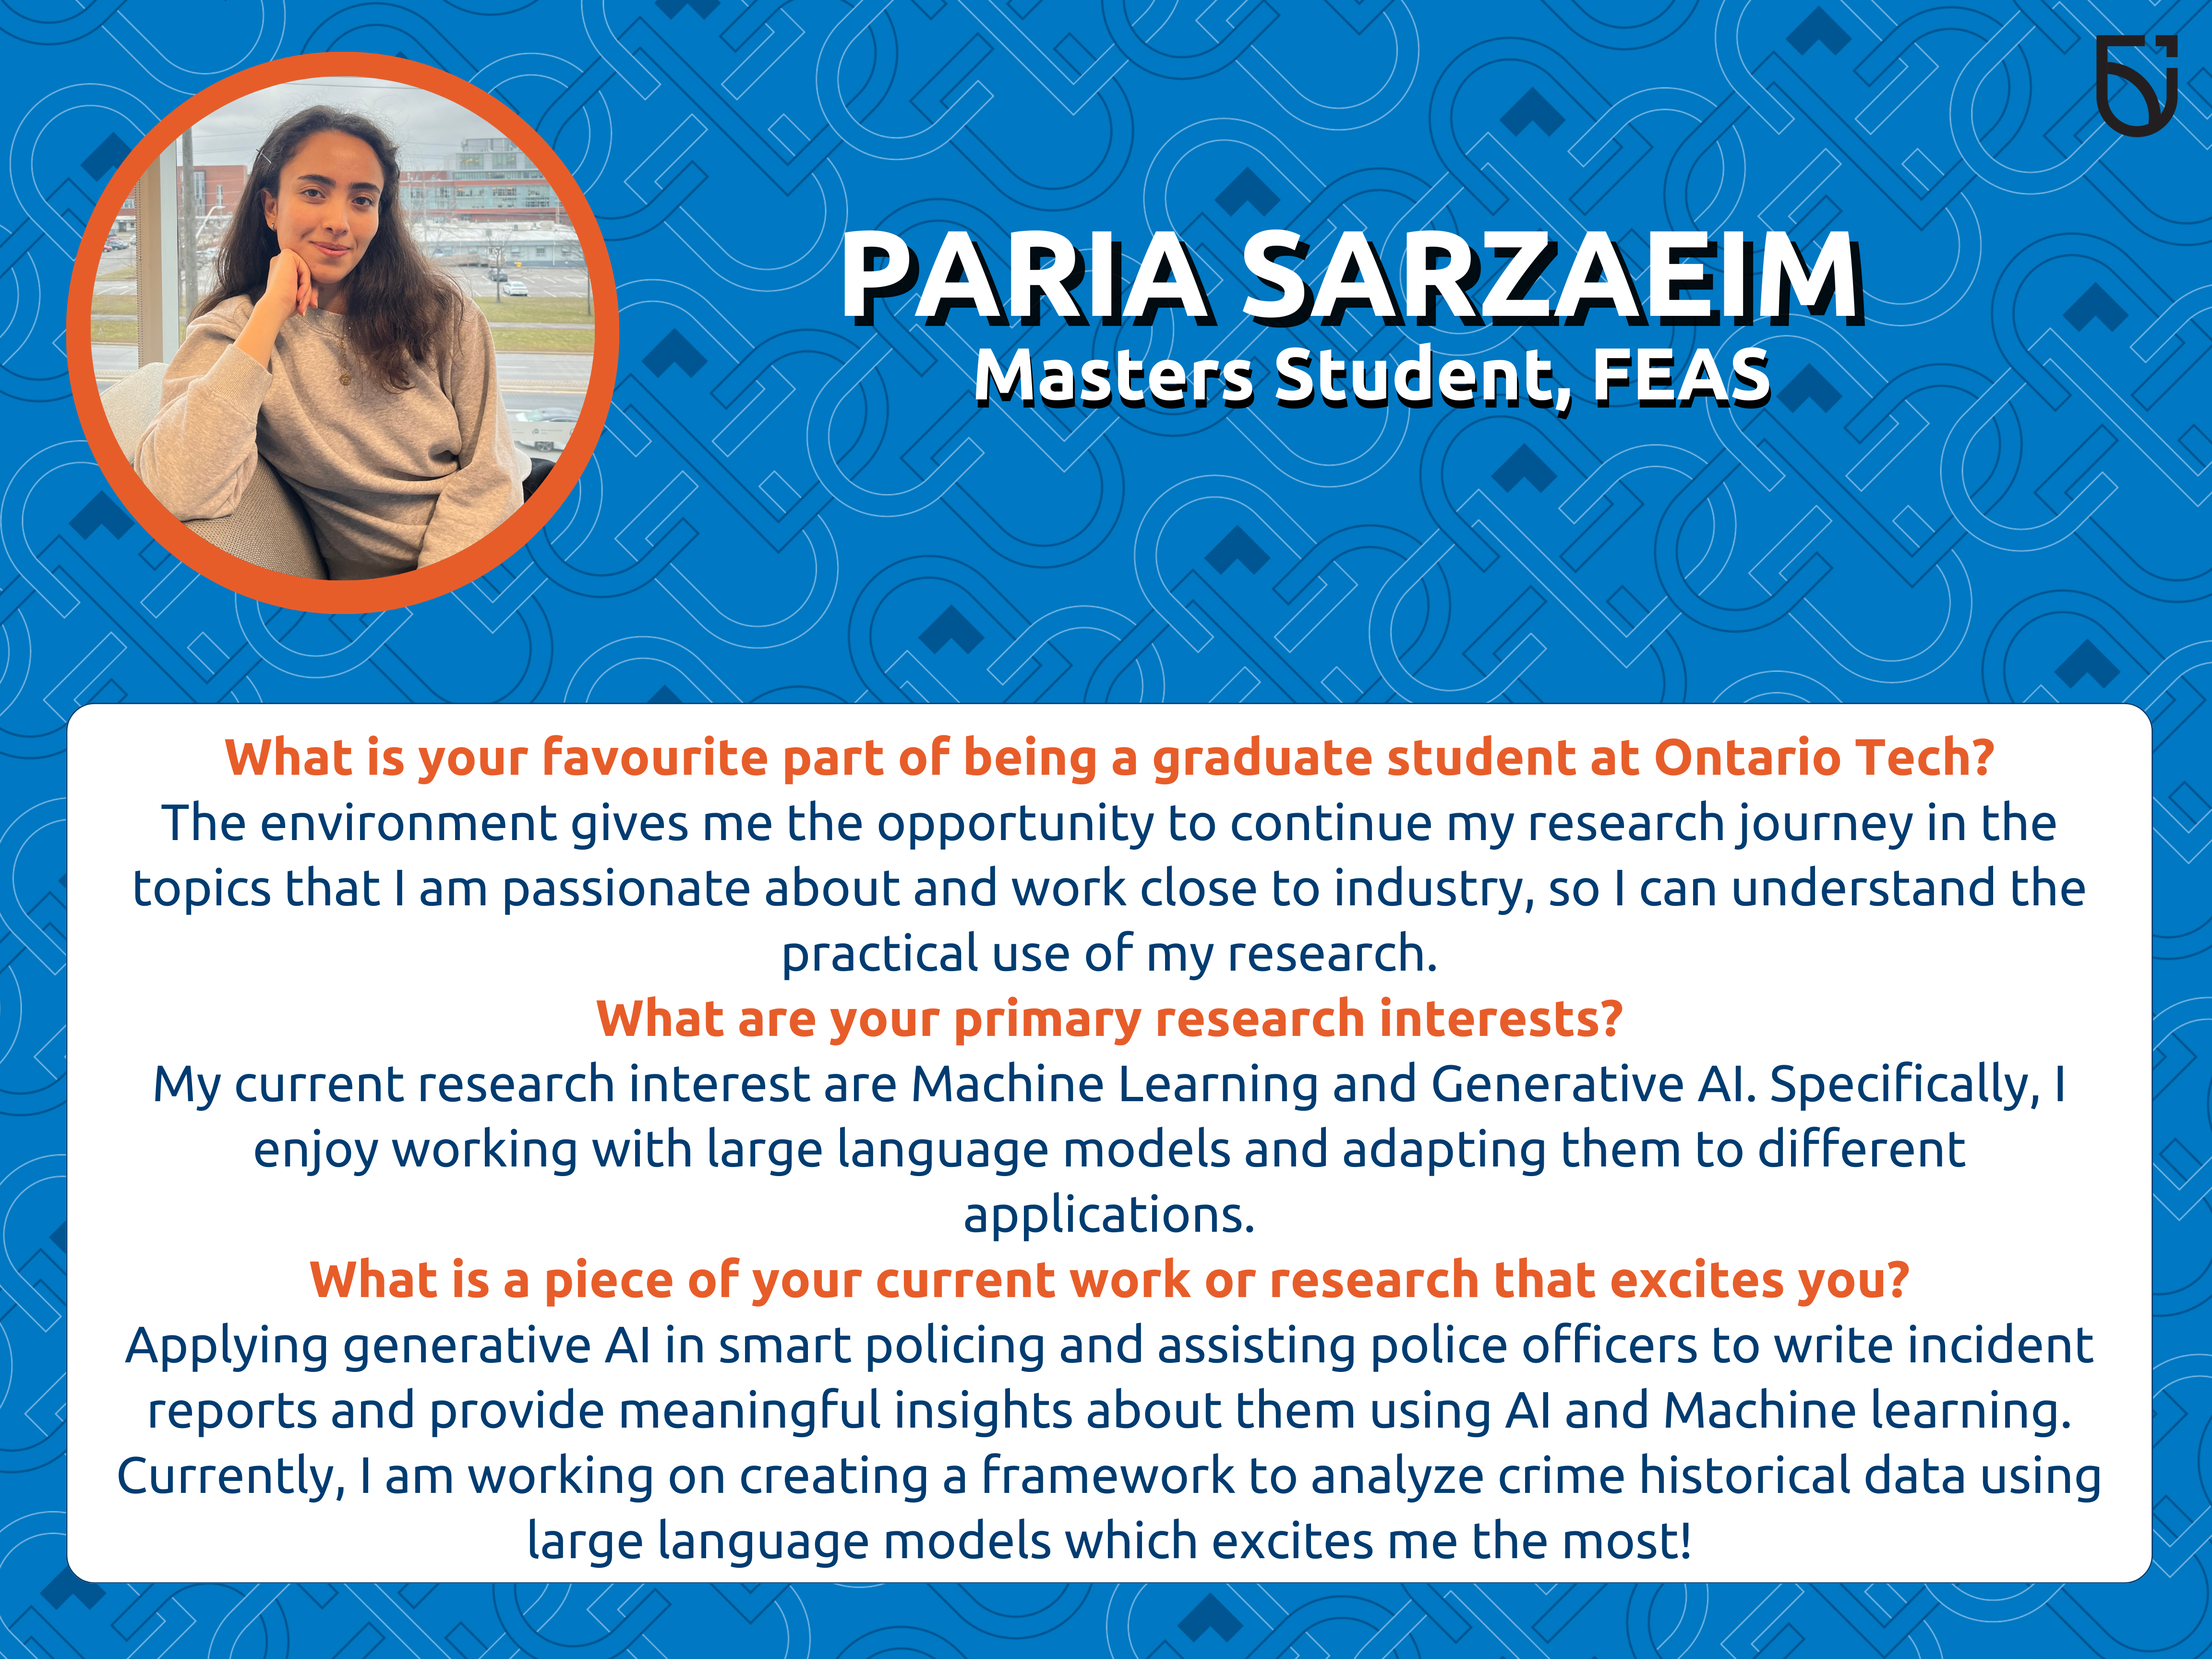 This is a photo of Paria Sarzaeim, a Master's Student in the Faculty of Engineering and Applied Science